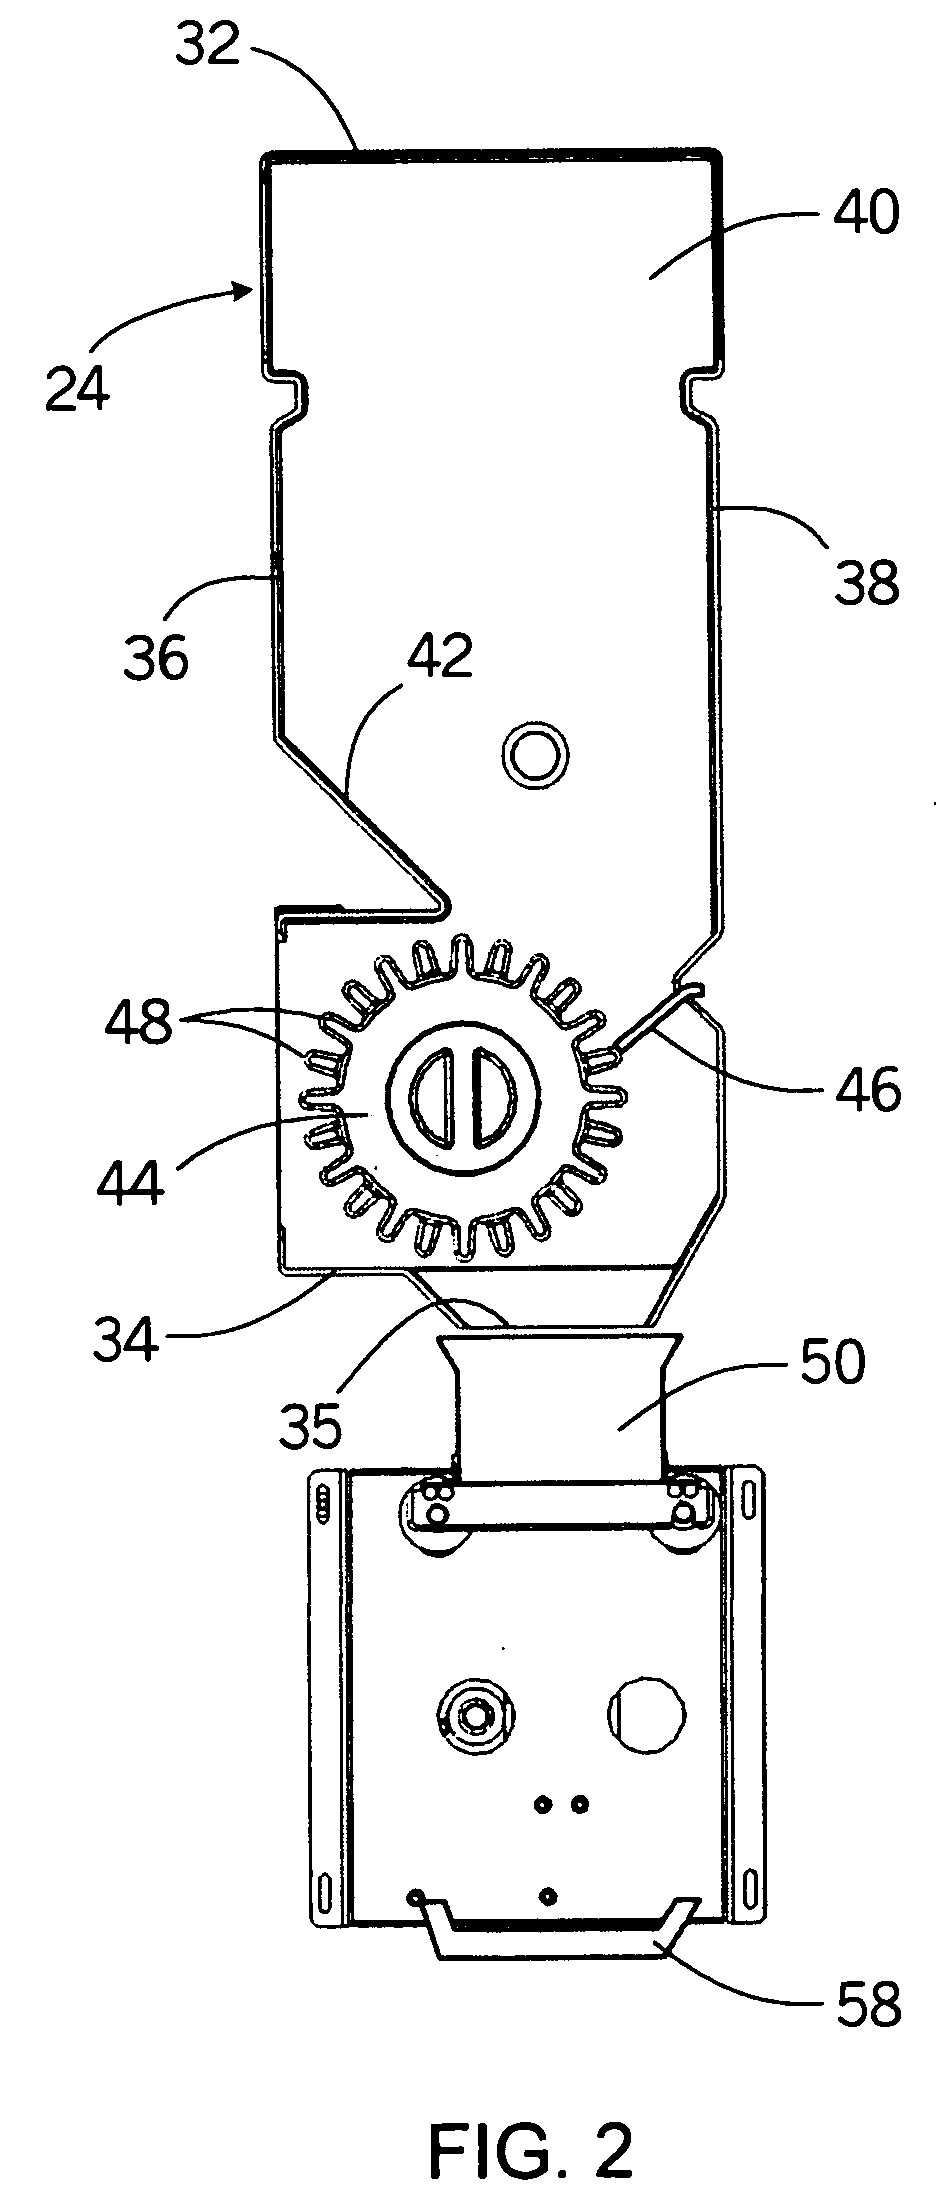 Multi-product dispenser and method of using same